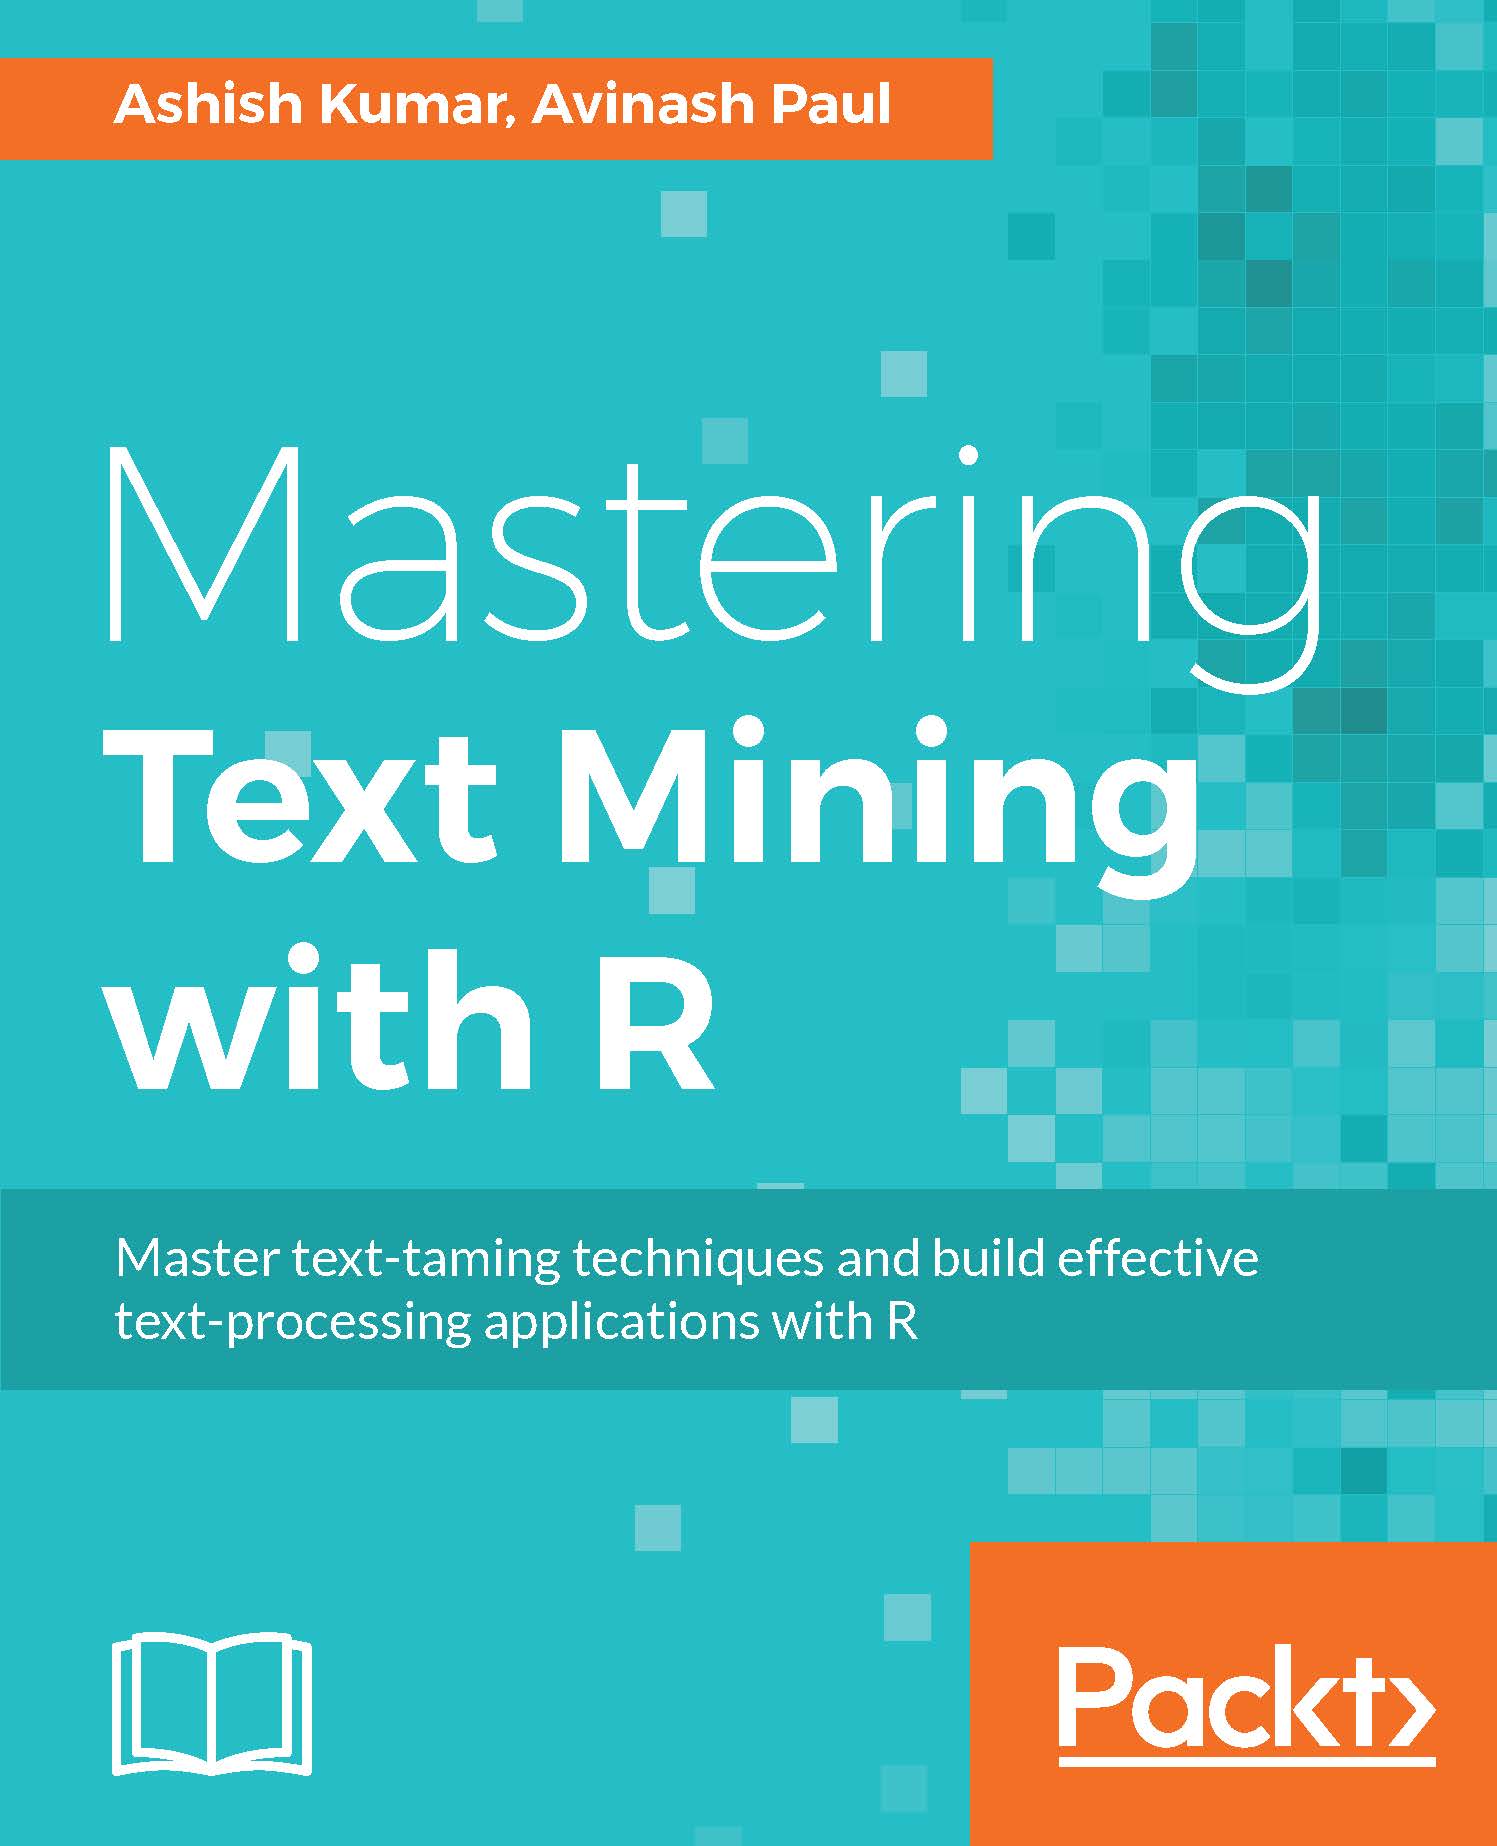 Mastering Text Mining with R: Extract and recognize your text data